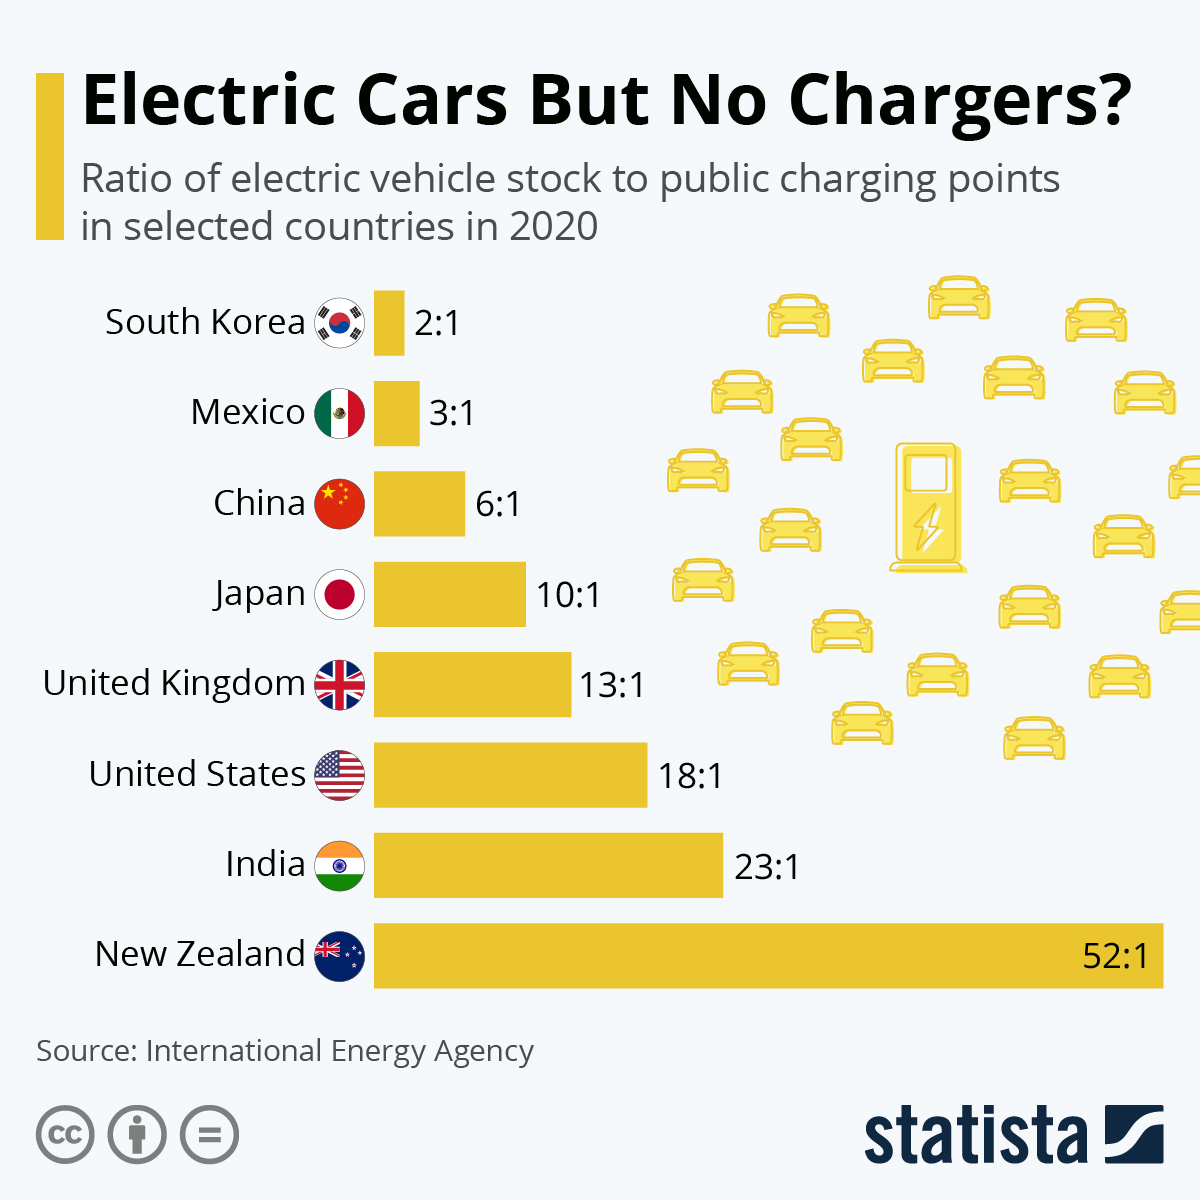 Electric Cars But No Chargers?